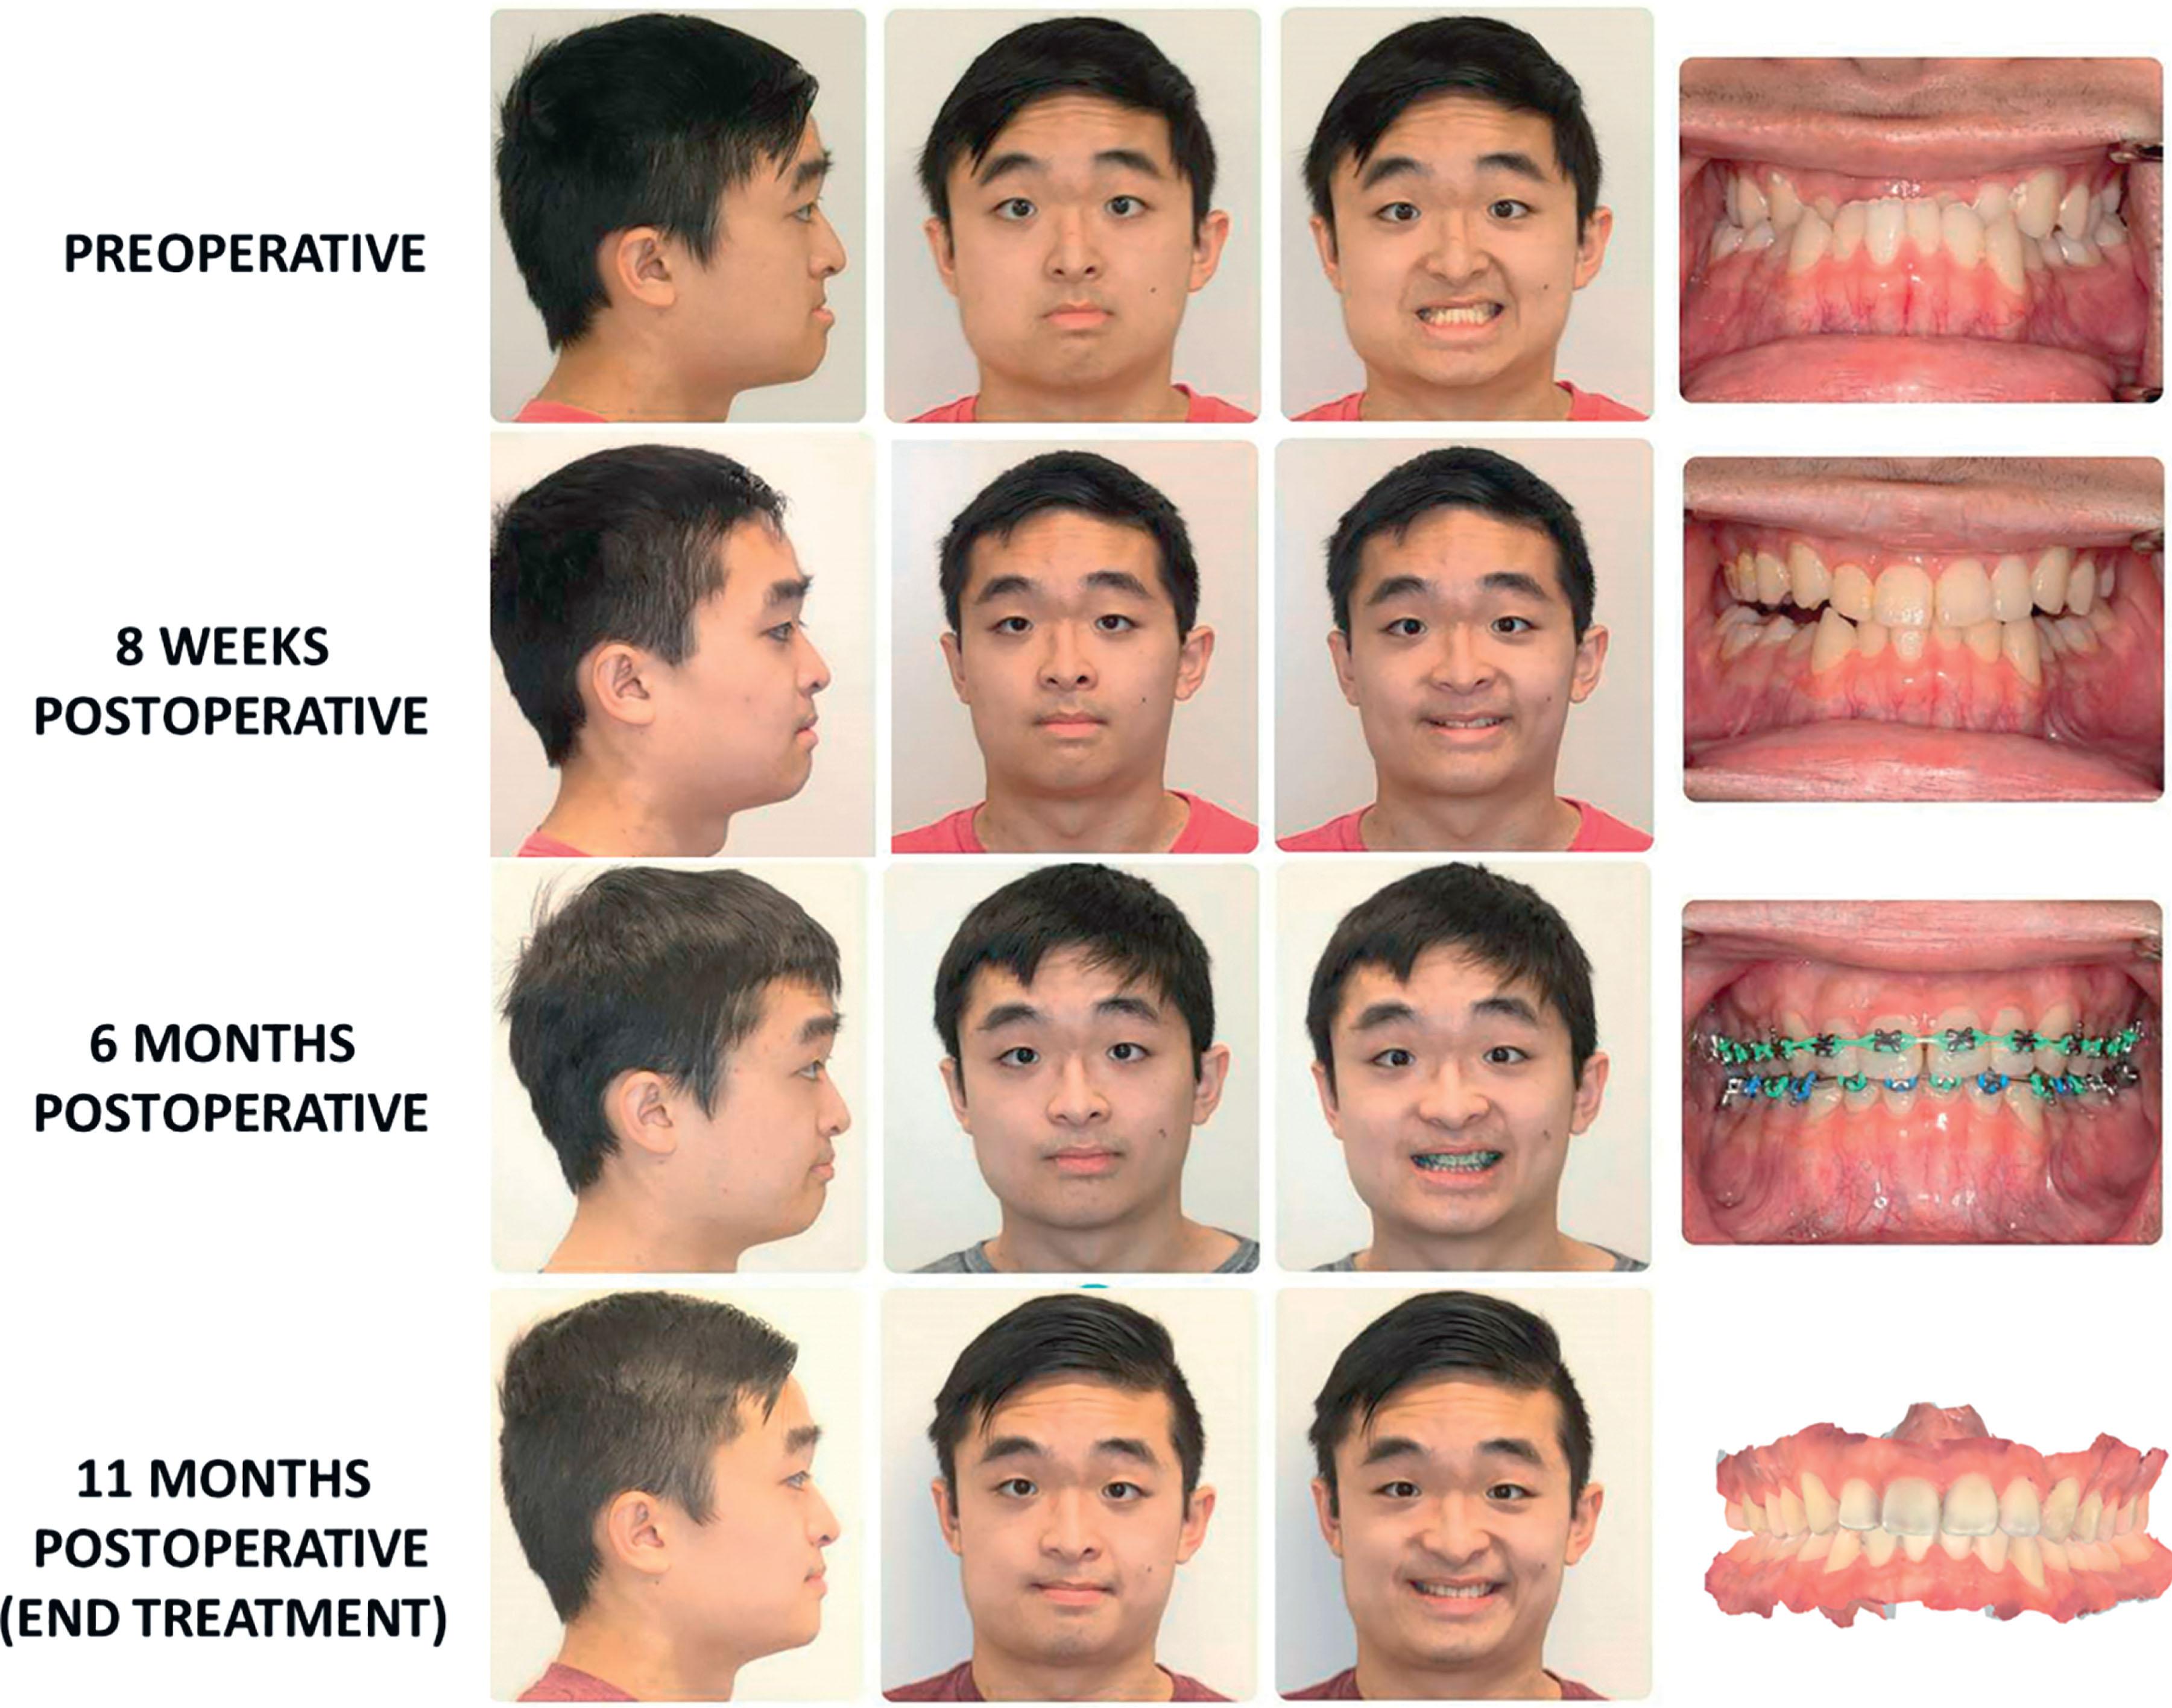 Figure 6.2.14, This patient with type I neurofibromatosis was diagnosed with maxillary sagittal hypoplasia. The mandibular position was appropriate and there was no facial asymmetry. A surgery-first approach was undertaken, utilizing a Le Fort I osteotomy with sagittal advancement. At 6-months postoperatively, orthodontic coordination was largely complete. The patient completed orthodontic treatment at 11 months postoperatively. (Orthodontic care provided by Hitesh Kapadia, DDS, PhD.)